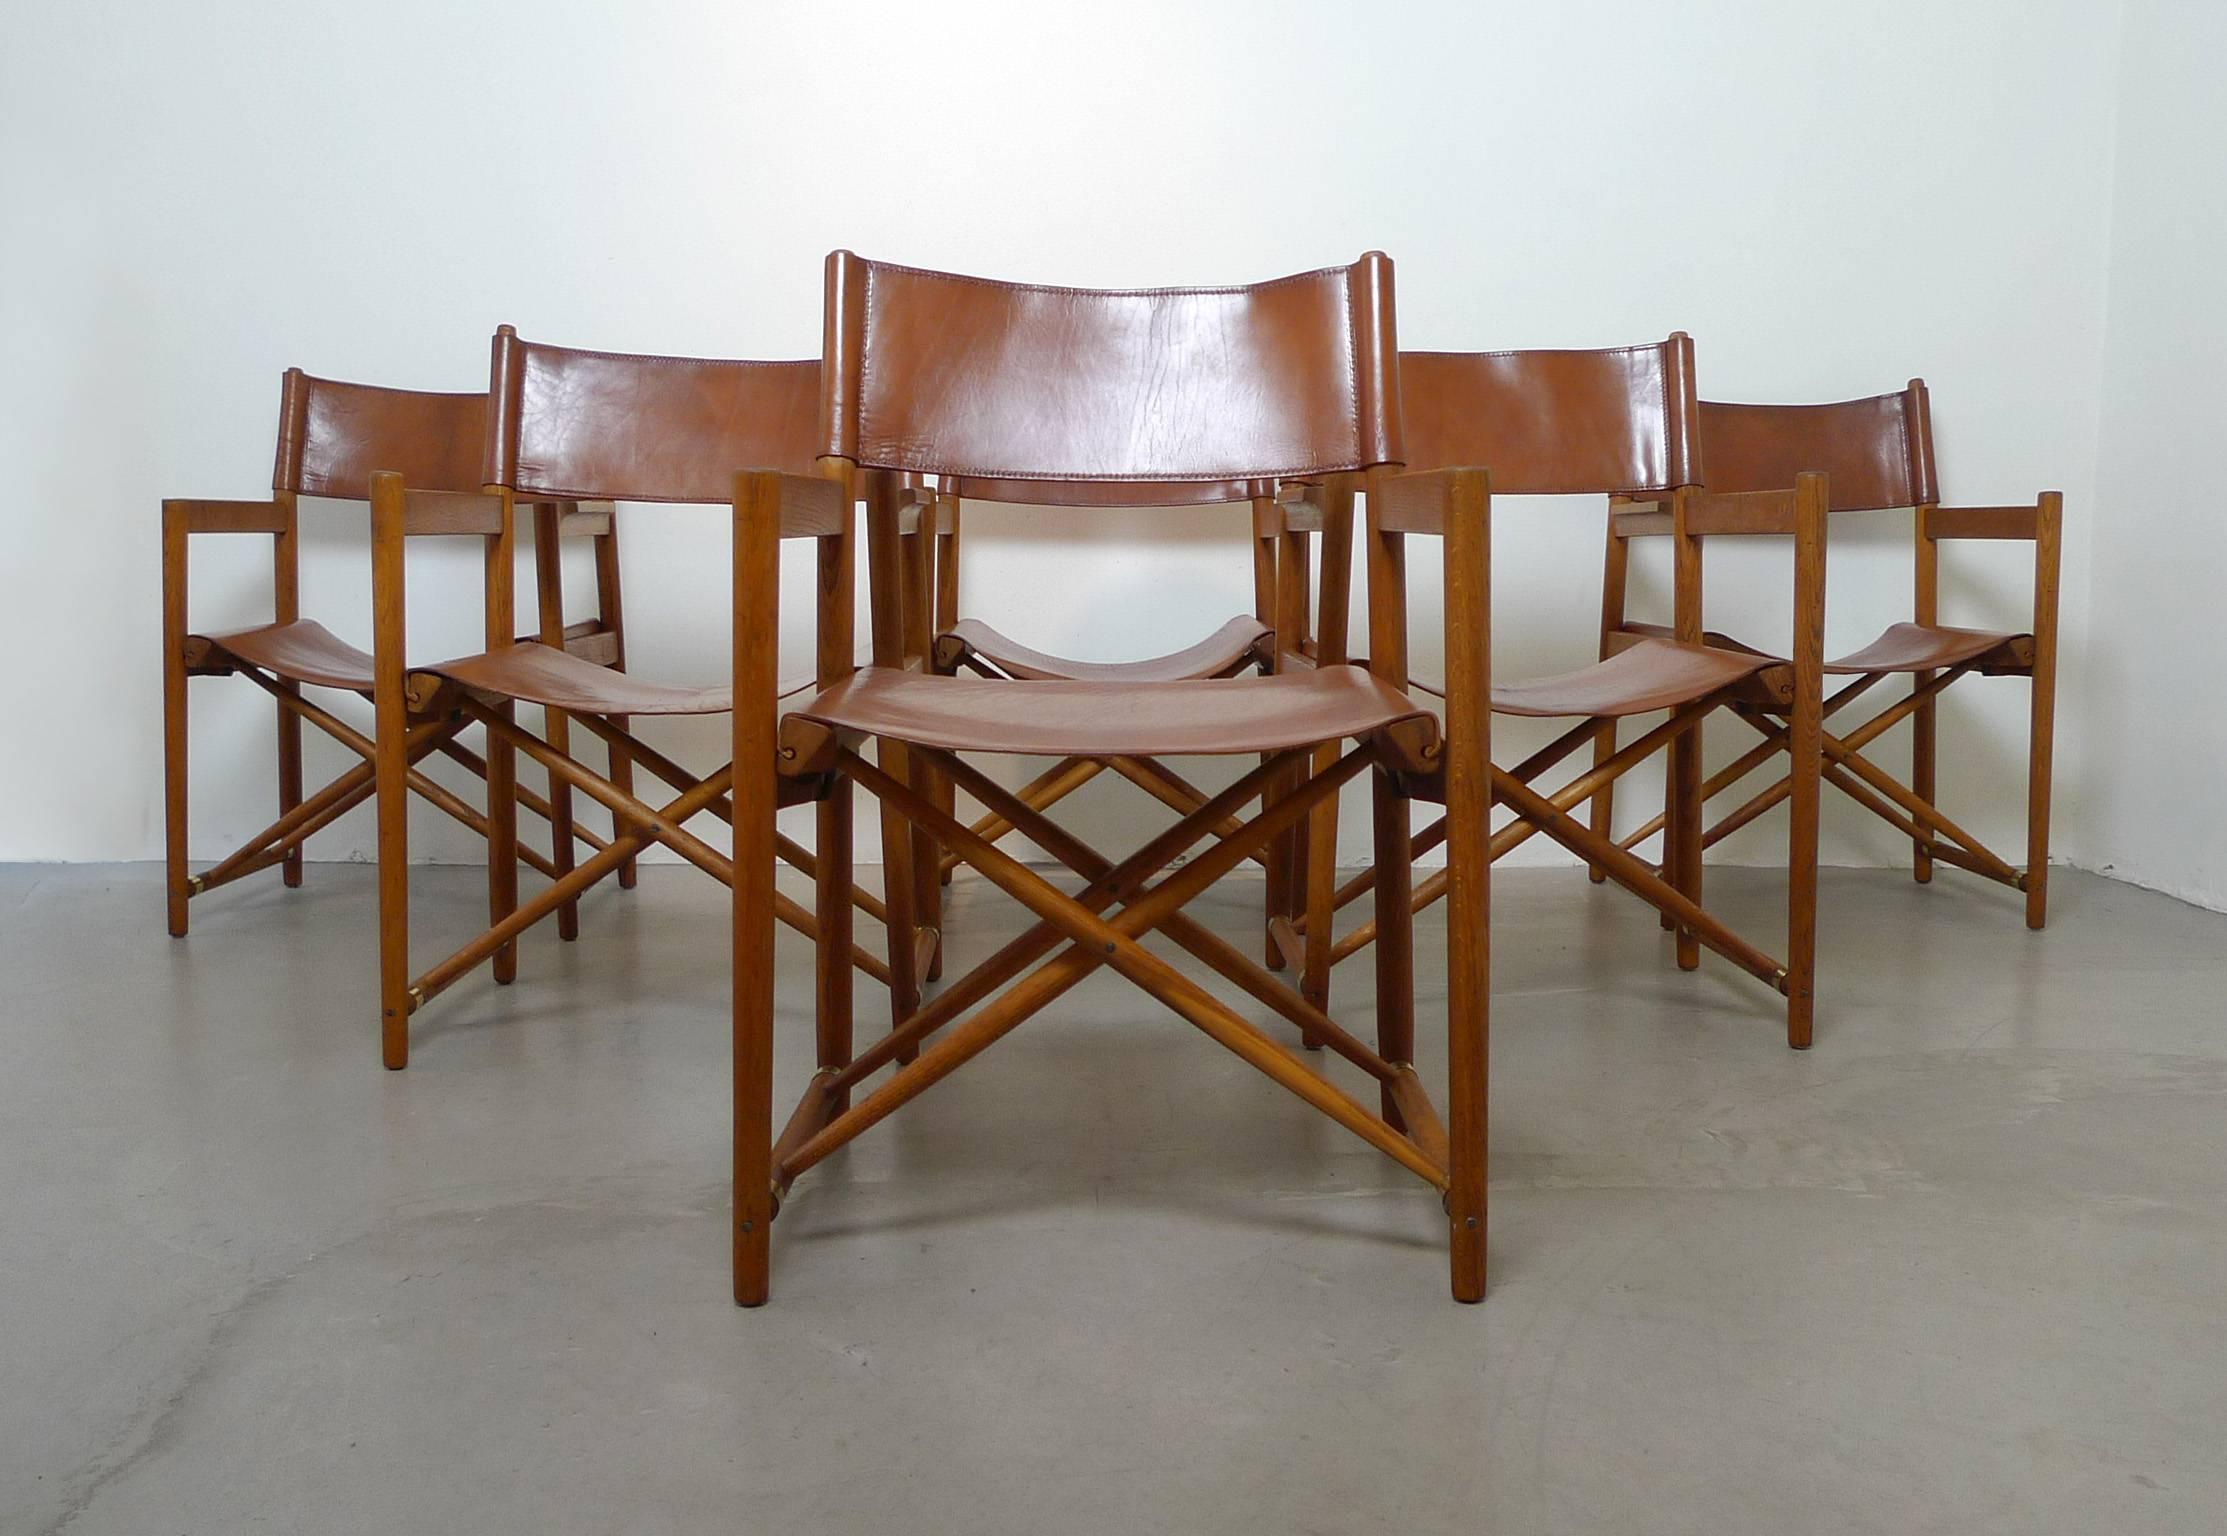 Rare foldable Safari chairs with an oak frame, cognac brown neck leather and brass sleeves. The dining chairs are in very good vintage condition, the leather surface has a charming patina.